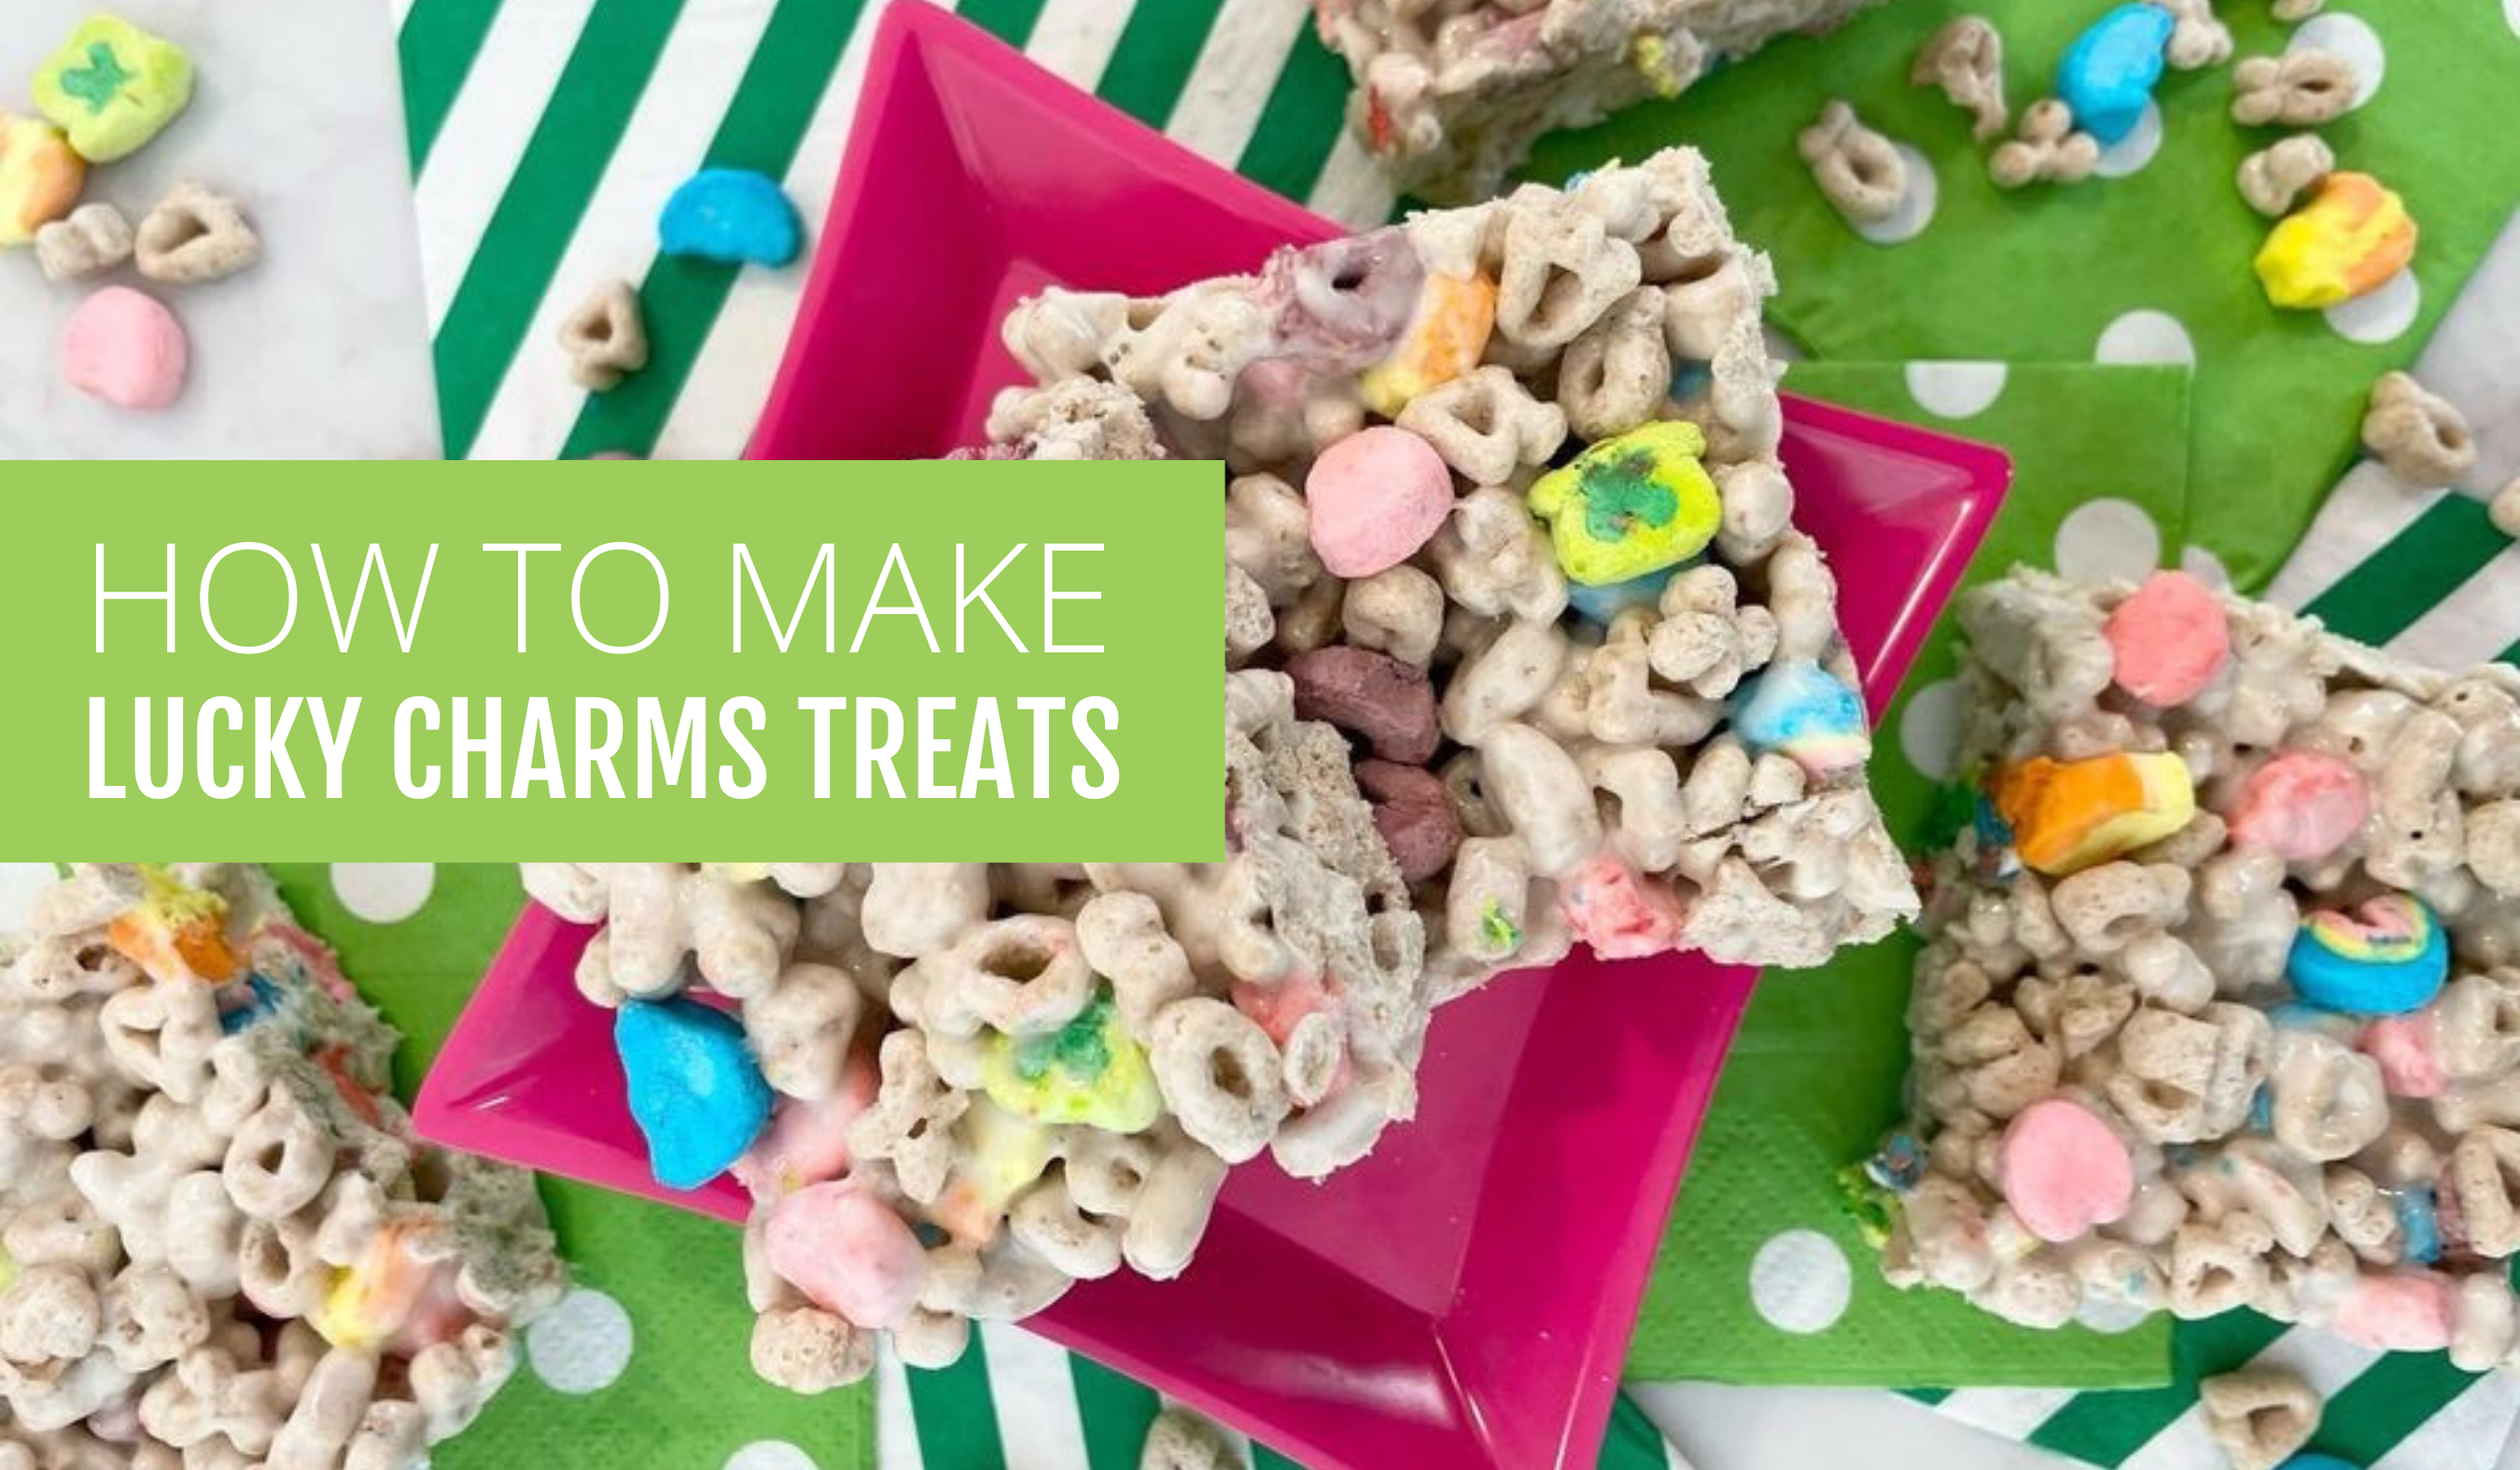 HOW TO MAKE LUCKY CHARMS TREATS